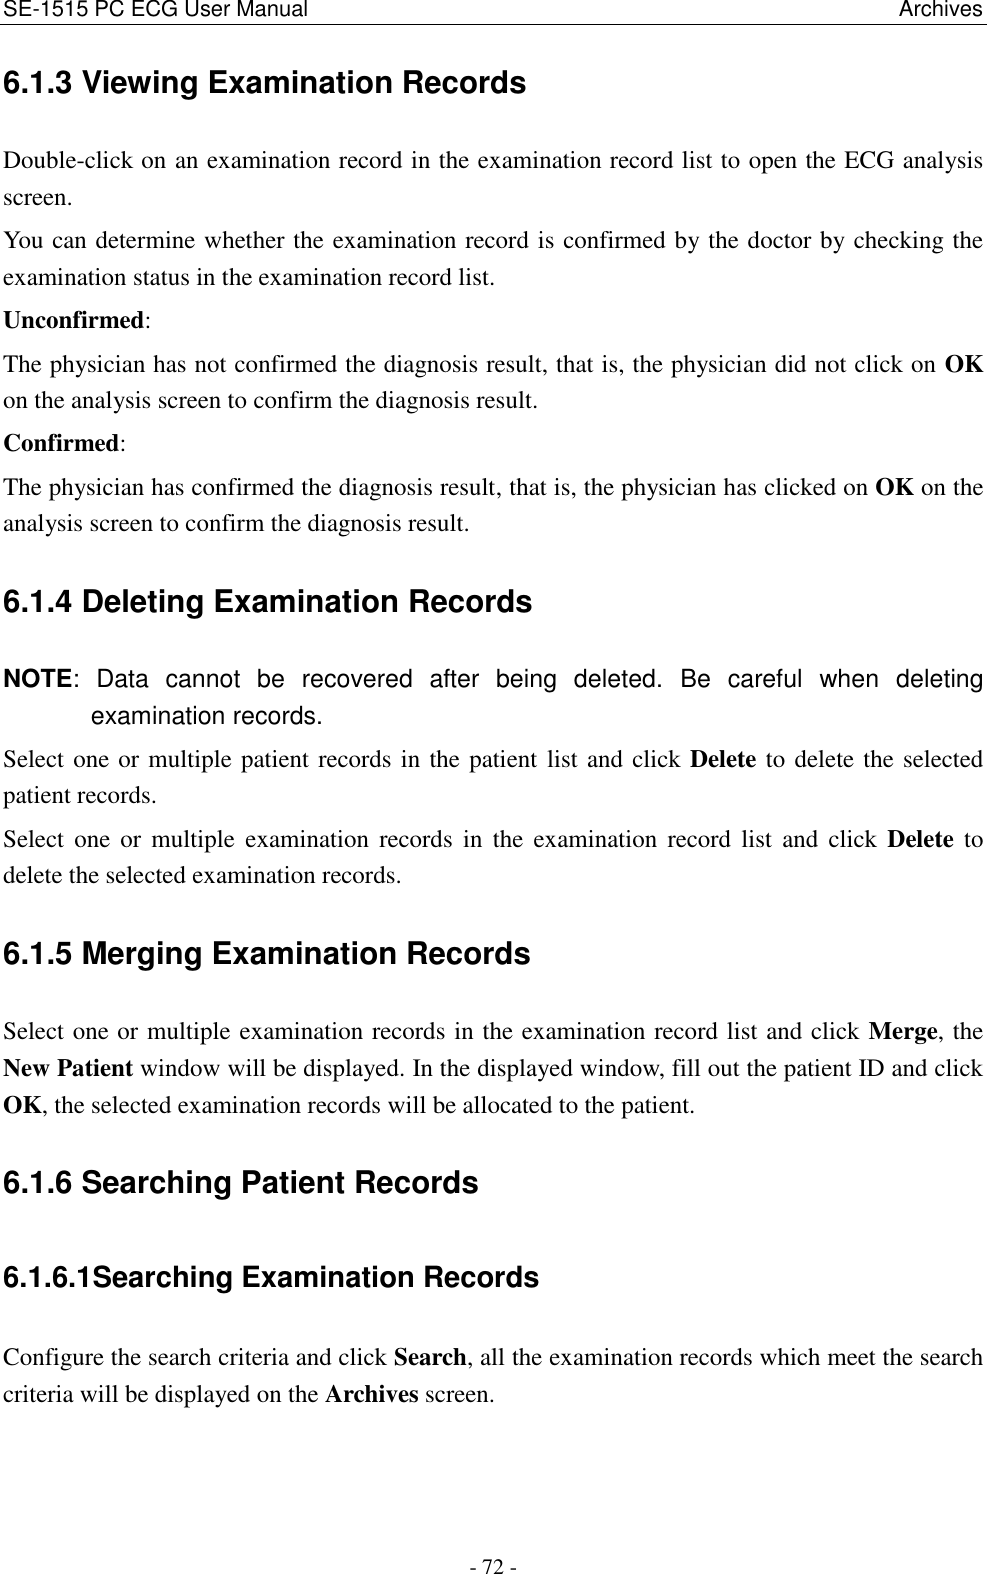 SE-1515 PC ECG User Manual                                                                                                            Archives - 72 - 6.1.3 Viewing Examination Records Double-click on an examination record in the examination record list to open the ECG analysis screen. You can determine whether the examination record is confirmed by the doctor by checking the examination status in the examination record list. Unconfirmed:   The physician has not confirmed the diagnosis result, that is, the physician did not click on OK on the analysis screen to confirm the diagnosis result. Confirmed:   The physician has confirmed the diagnosis result, that is, the physician has clicked on OK on the analysis screen to confirm the diagnosis result. 6.1.4 Deleting Examination Records NOTE:  Data  cannot  be  recovered  after  being  deleted.  Be  careful  when  deleting examination records. Select one or multiple patient records in the patient list and click Delete to delete the selected patient records. Select  one  or  multiple  examination  records  in  the  examination  record  list  and  click  Delete  to delete the selected examination records. 6.1.5 Merging Examination Records Select one or multiple examination records in the examination record list and click Merge, the New Patient window will be displayed. In the displayed window, fill out the patient ID and click OK, the selected examination records will be allocated to the patient. 6.1.6 Searching Patient Records 6.1.6.1Searching Examination Records Configure the search criteria and click Search, all the examination records which meet the search criteria will be displayed on the Archives screen. 